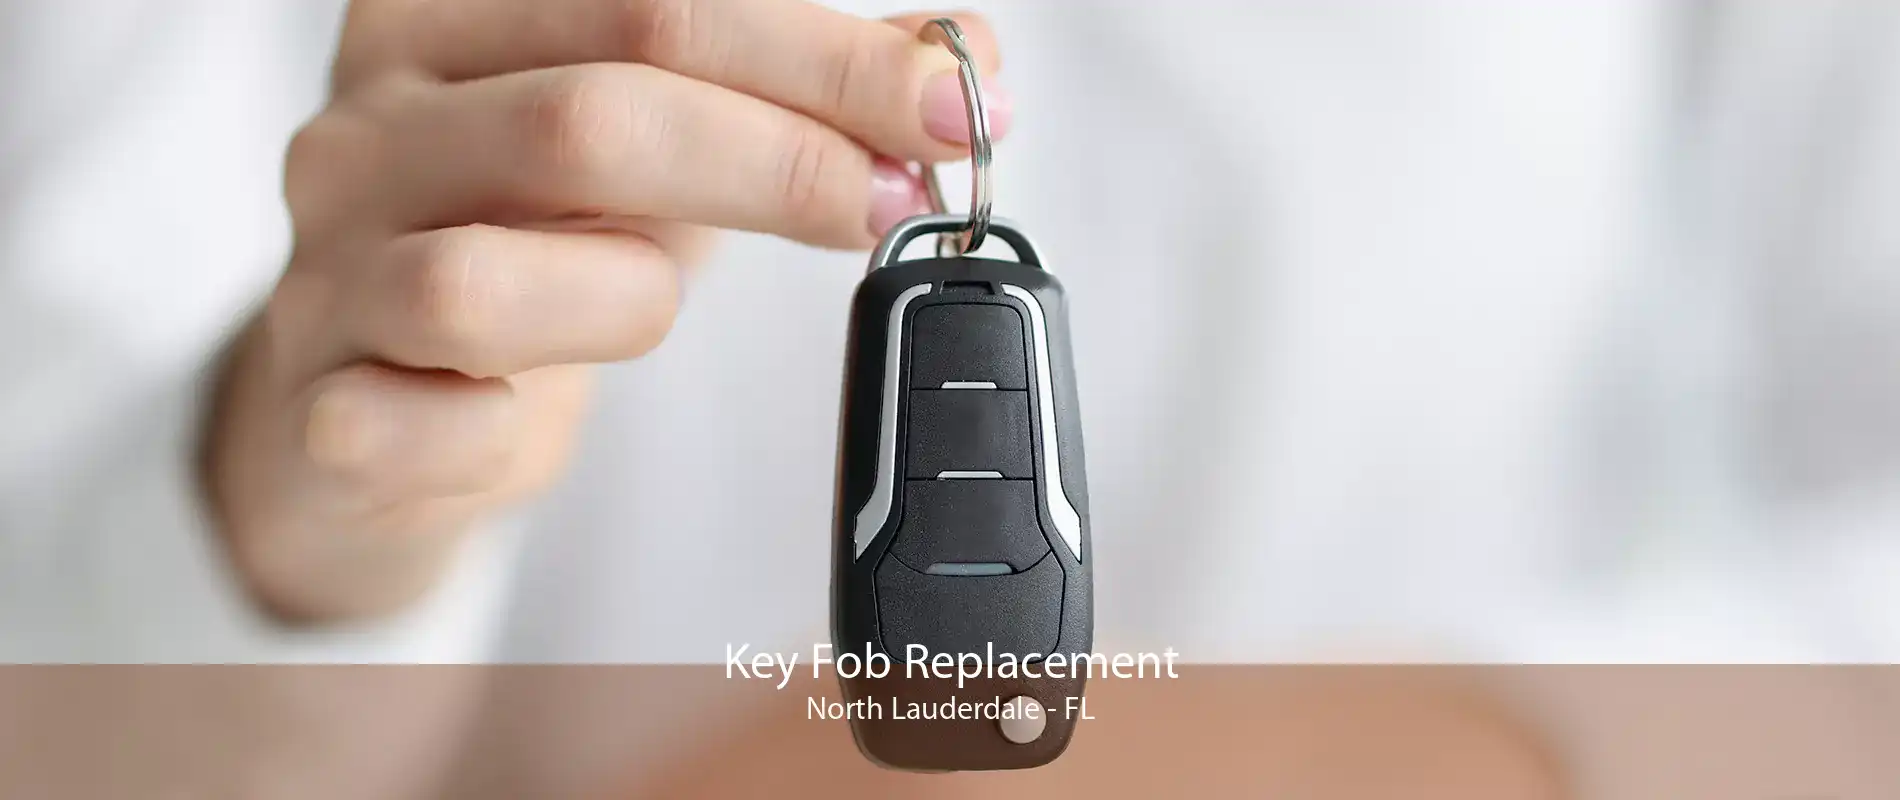 Key Fob Replacement North Lauderdale - FL